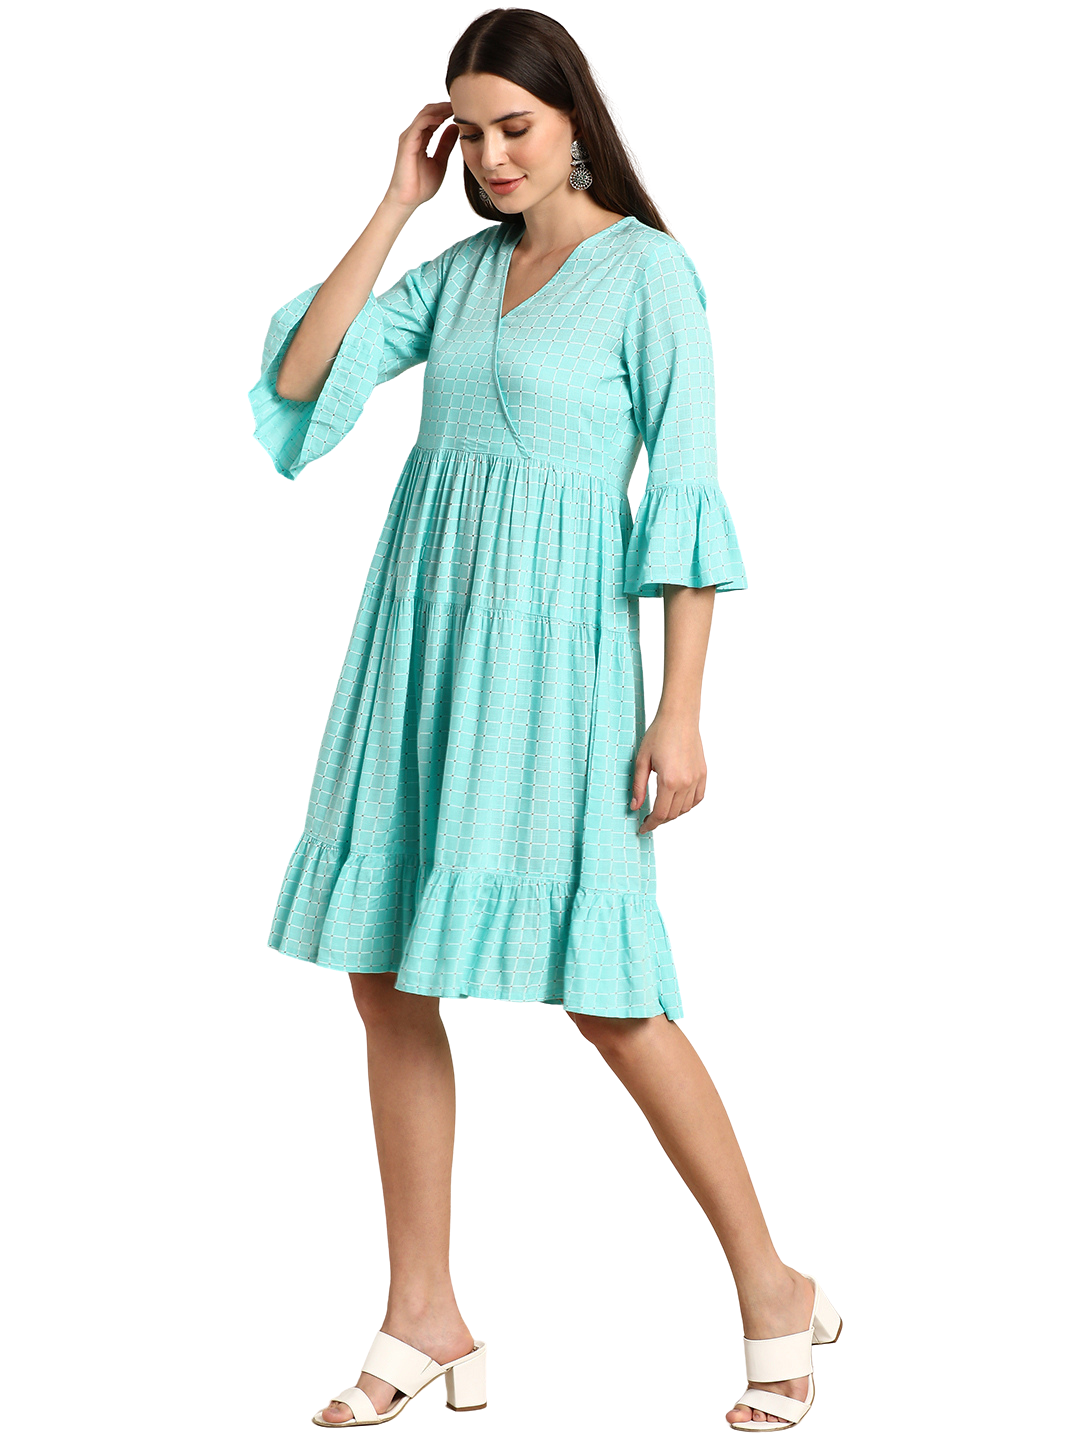 Women's Turquoise Rayon Checkered Flared Western Dress - Manohara